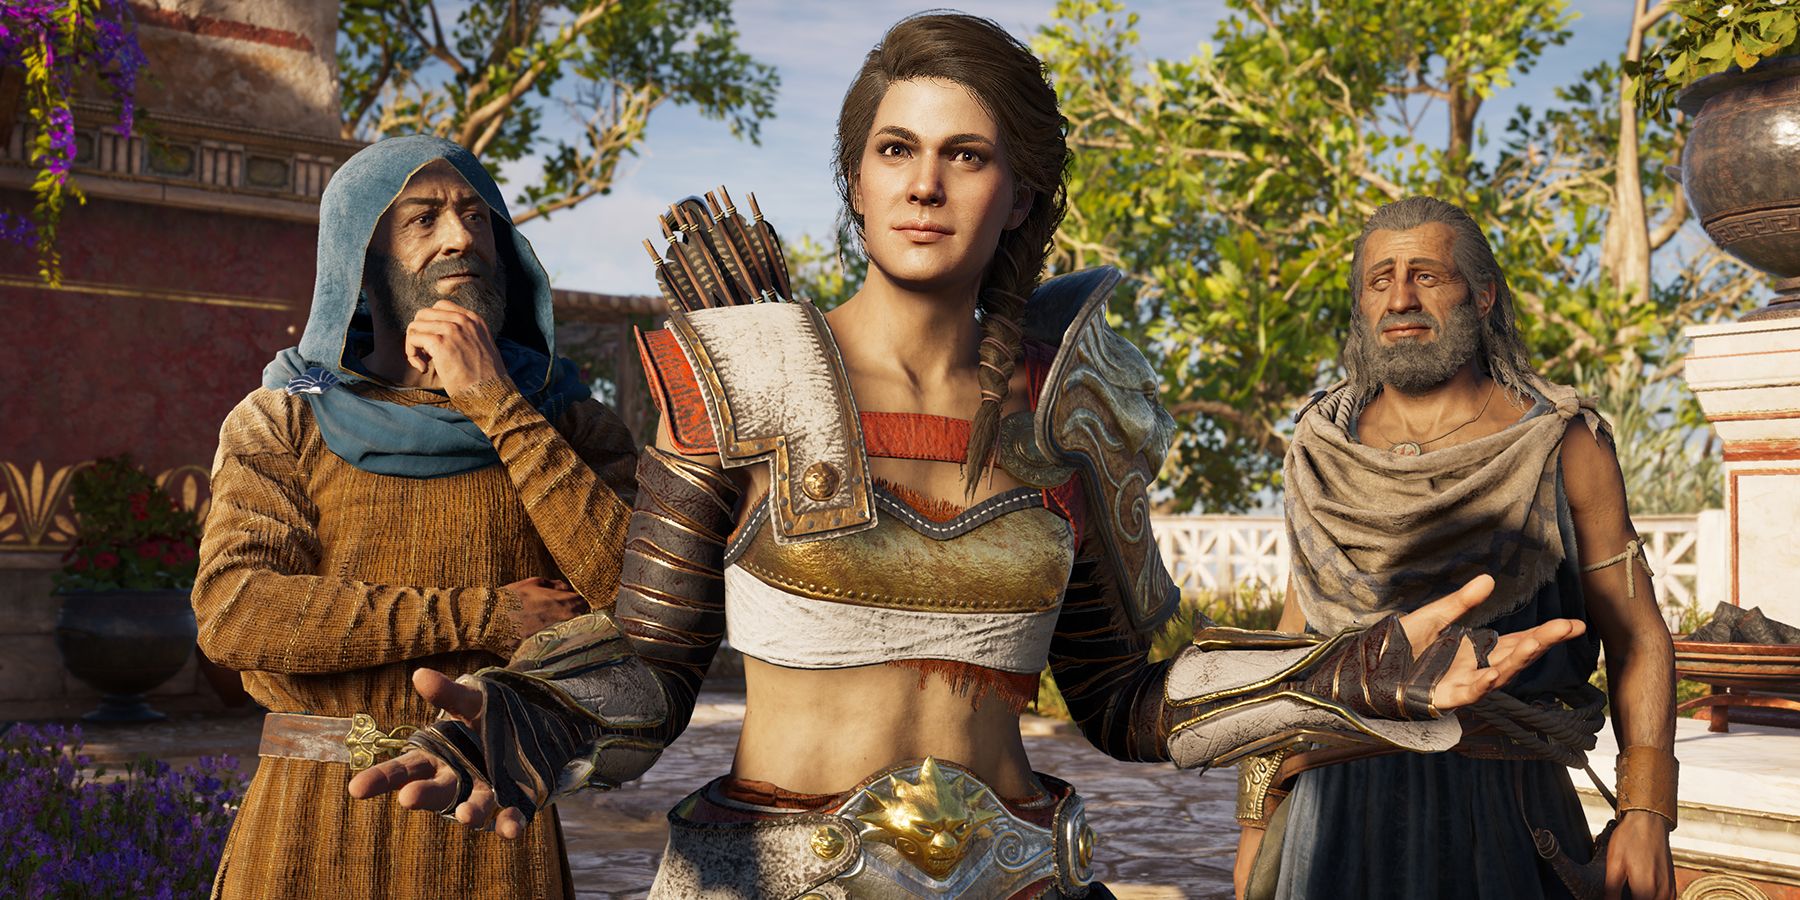 Protagonist Kassandra stands shrugging with two allies flanking her 